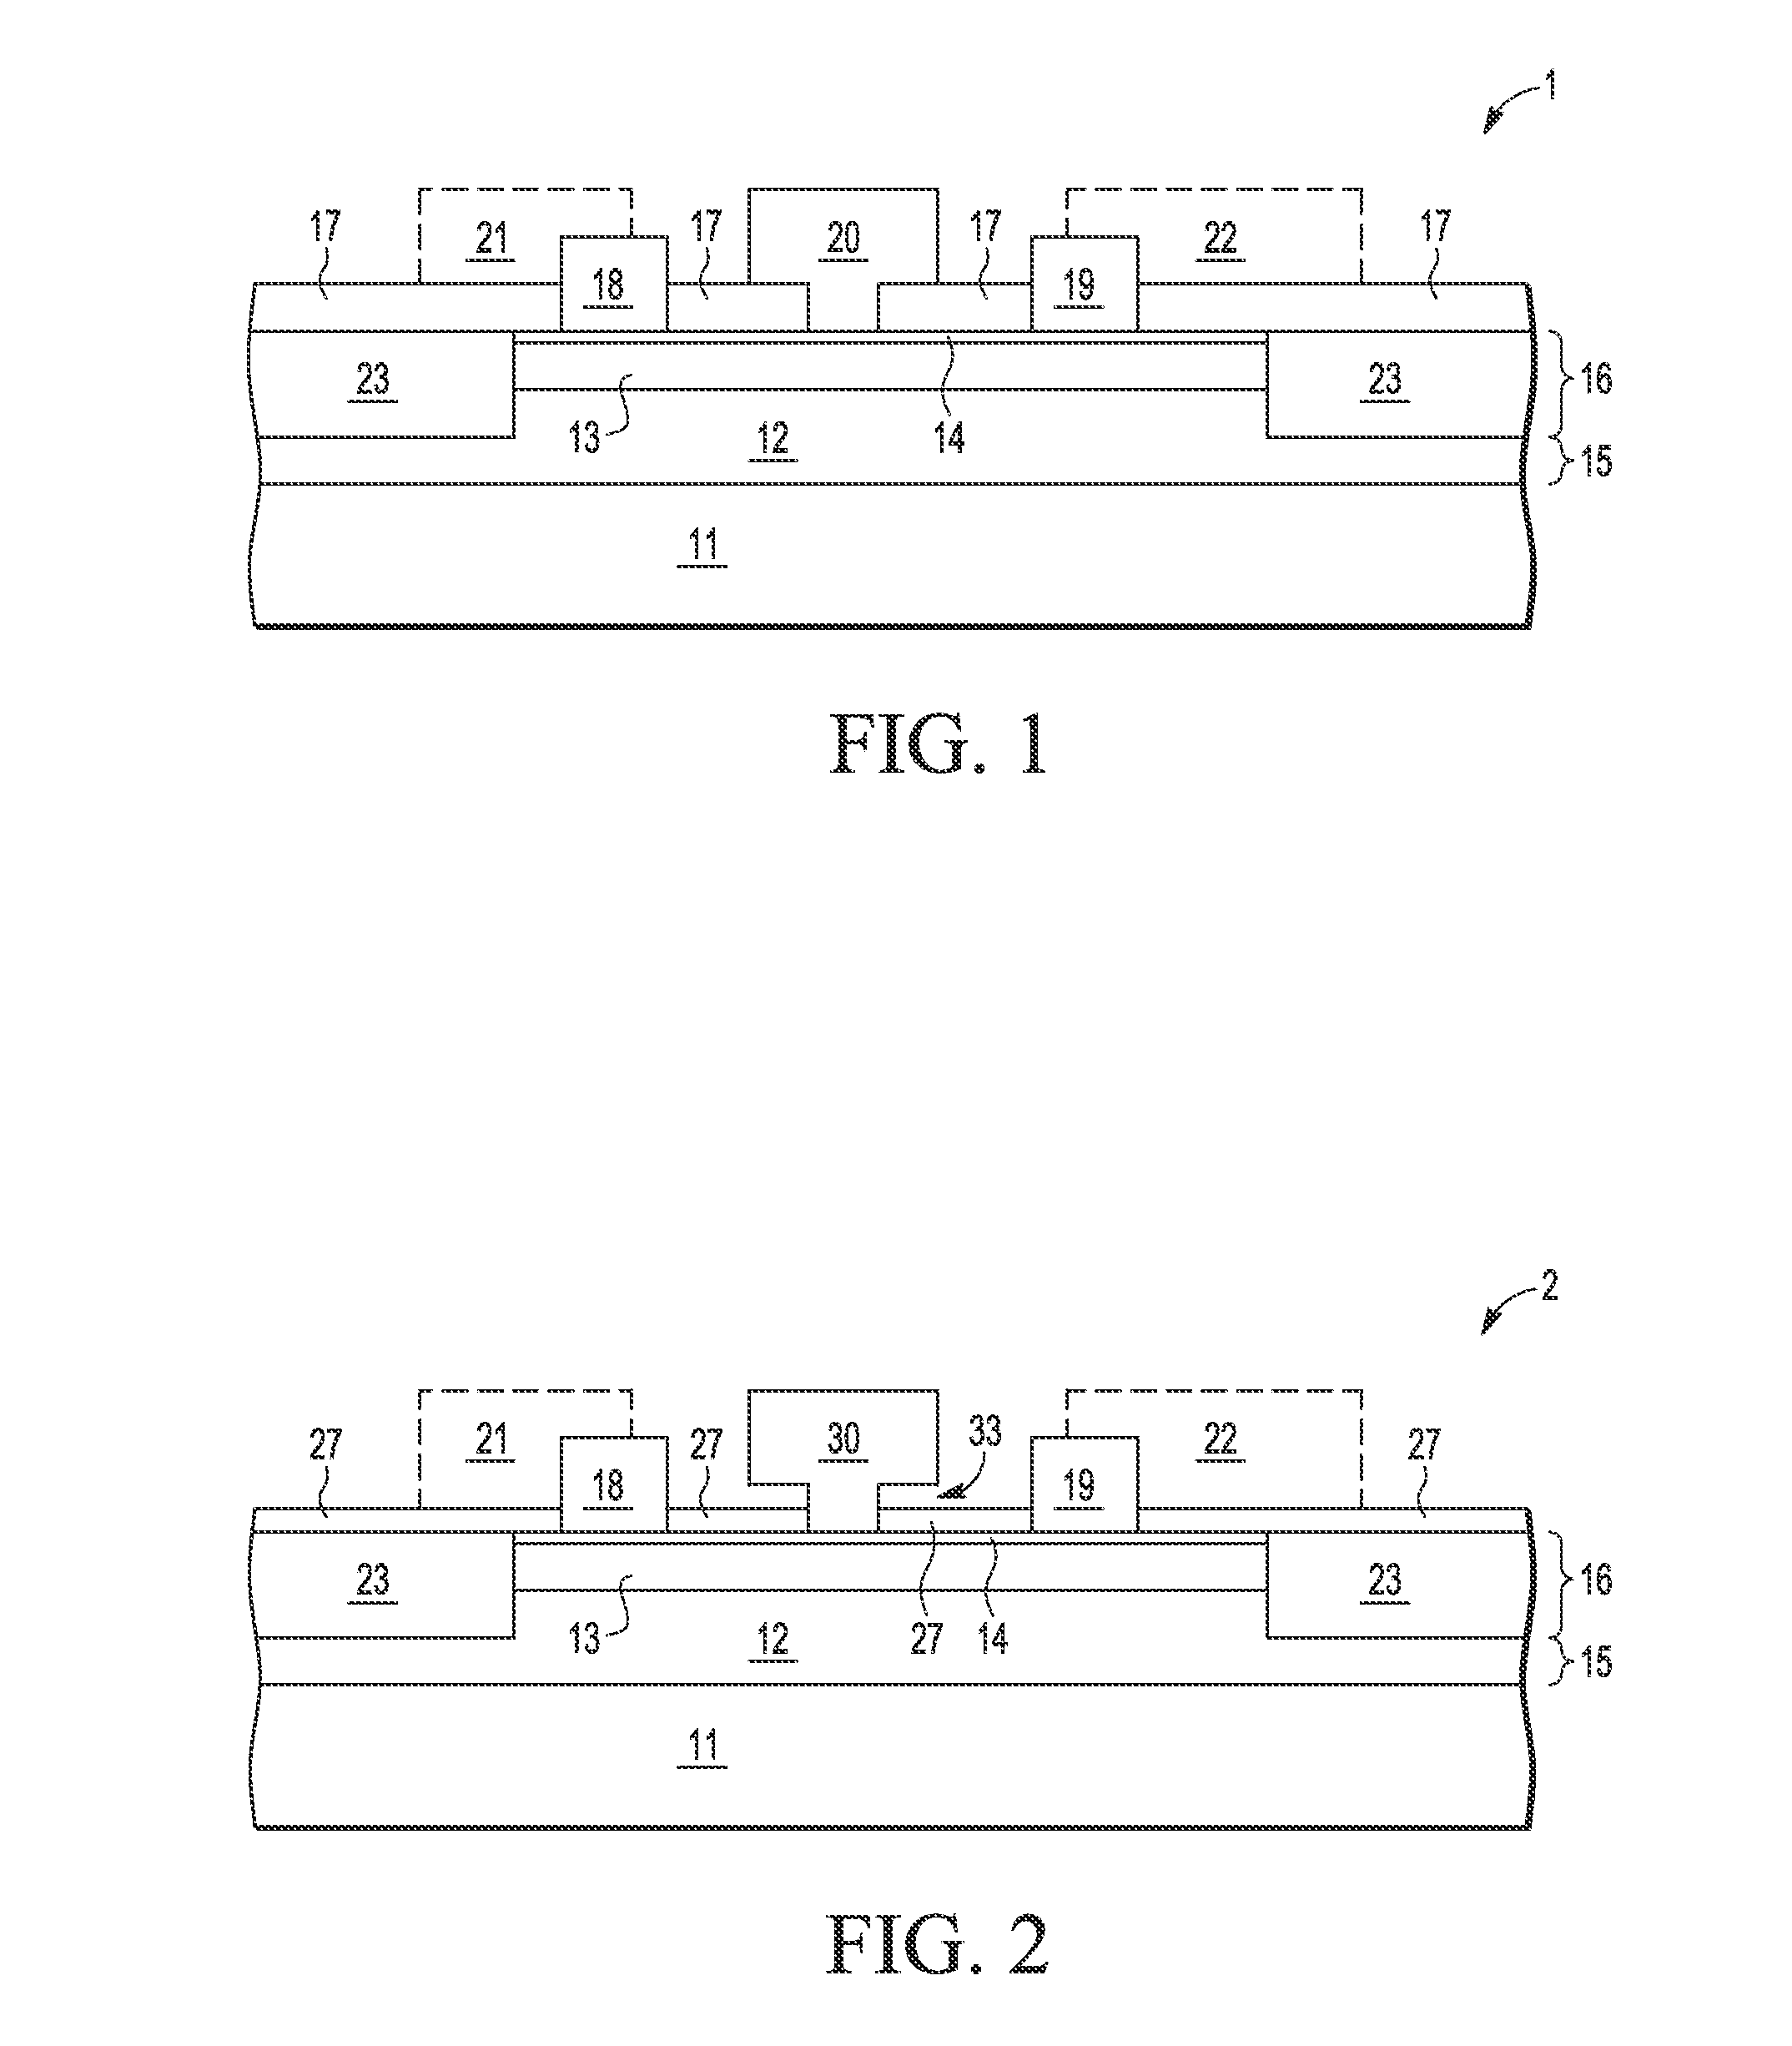 Method for Improving E-Beam Lithography Gate Metal Profile for Enhanced Field Control